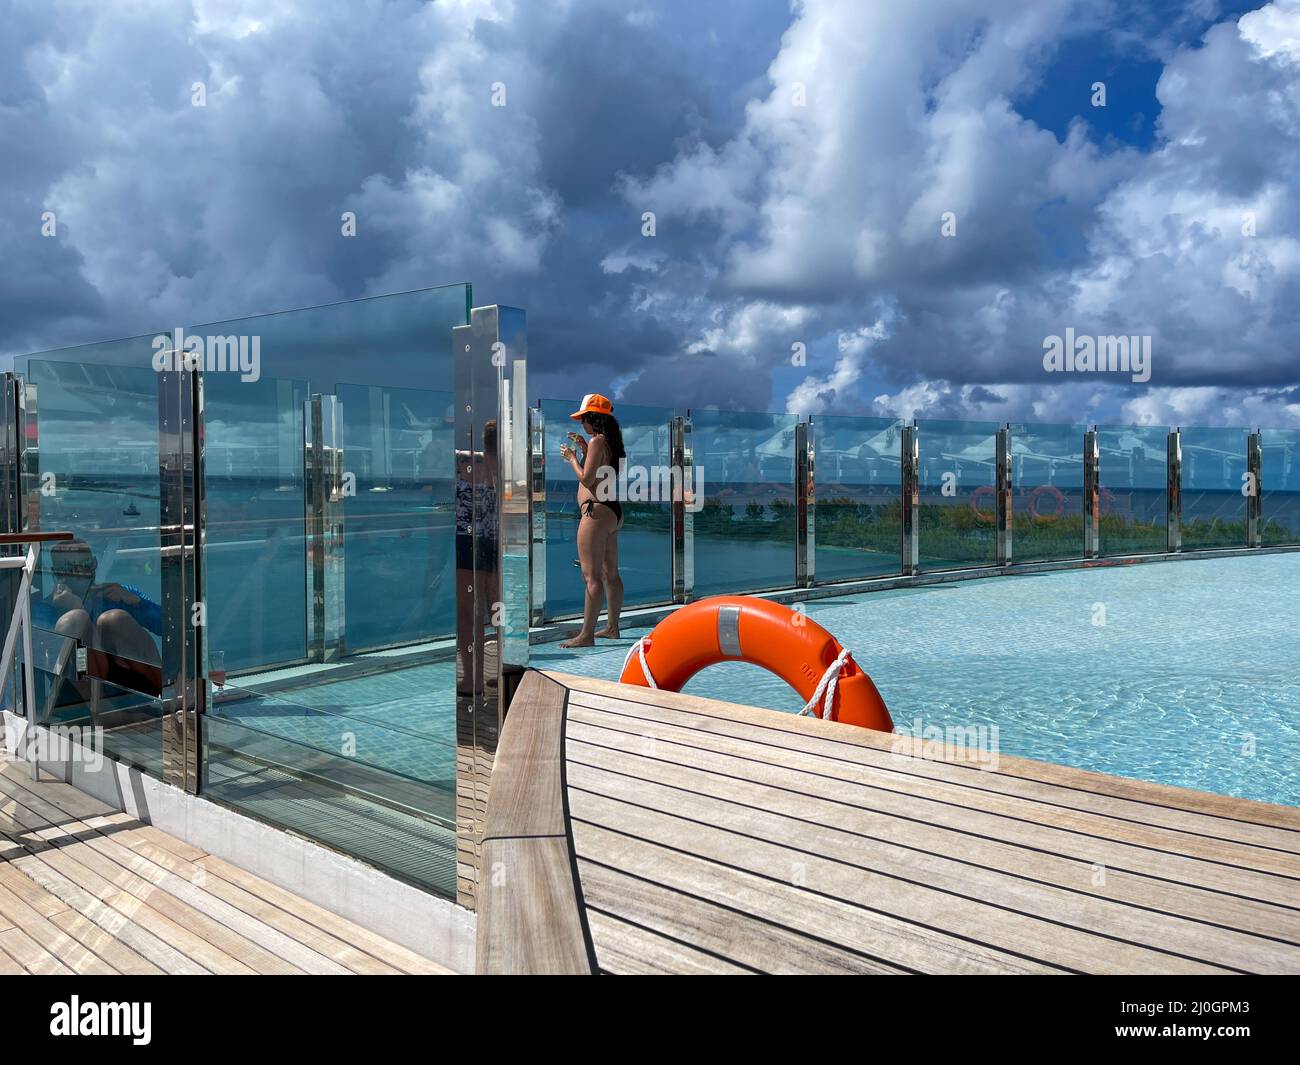 Orlando, FL USA - October 11, 2021:  The quiet adult swimming pool area on the MSC Cruise Ship Divina in Port Canaveral, Florida., Stock Photo